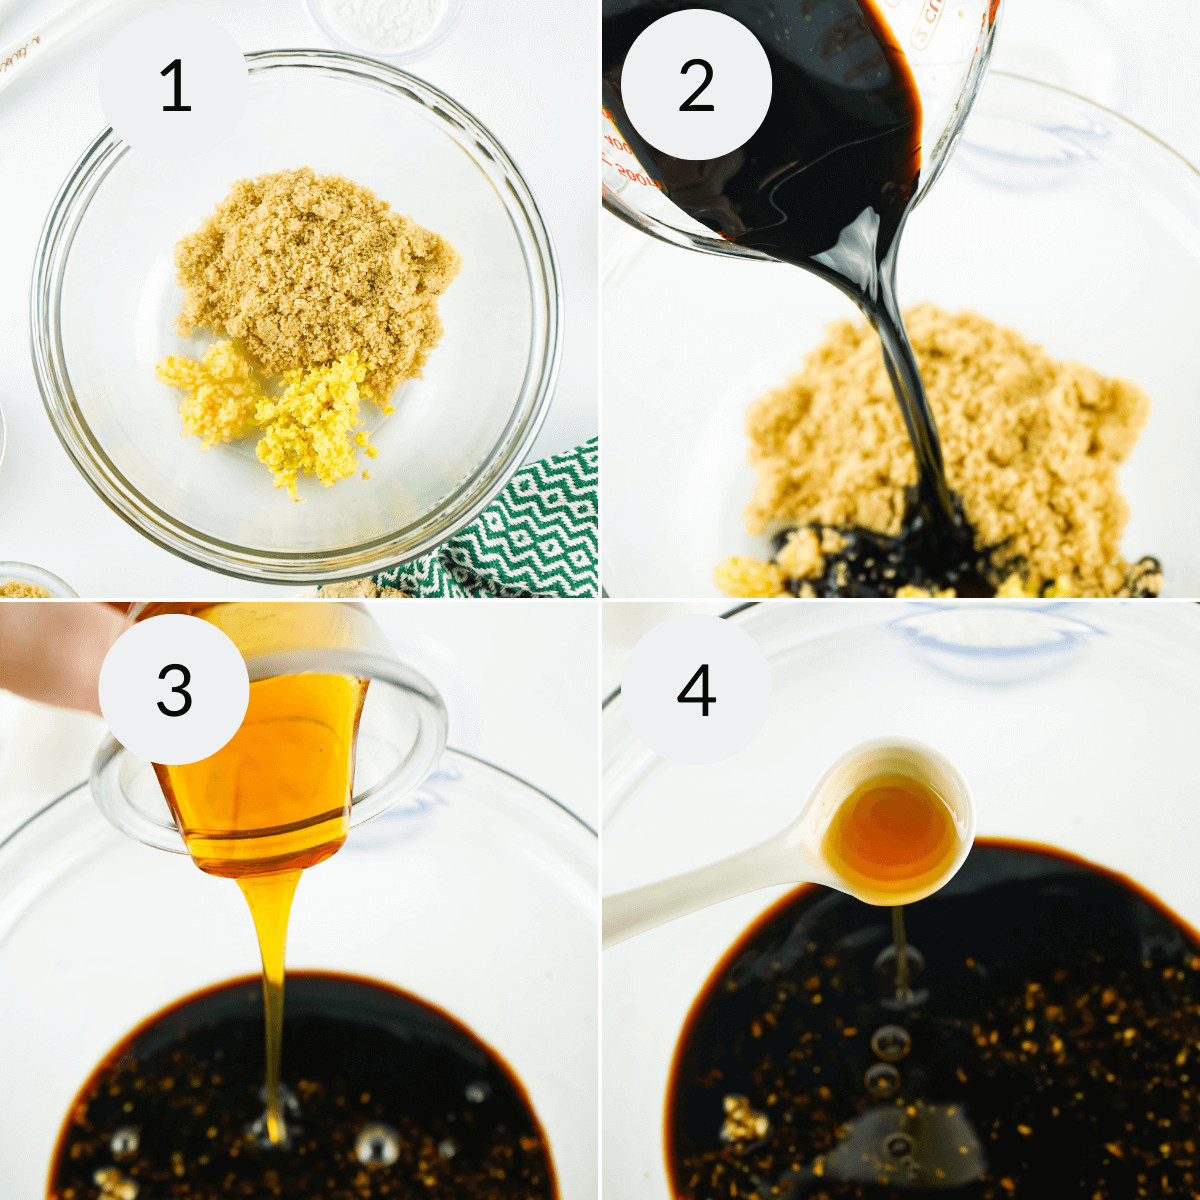 Step-by-step images showing ingredients being added to a bowl for Honey Teriyaki Sauce: 1) brown sugar and lemon zest, 2) pouring molasses, 3) adding honey,